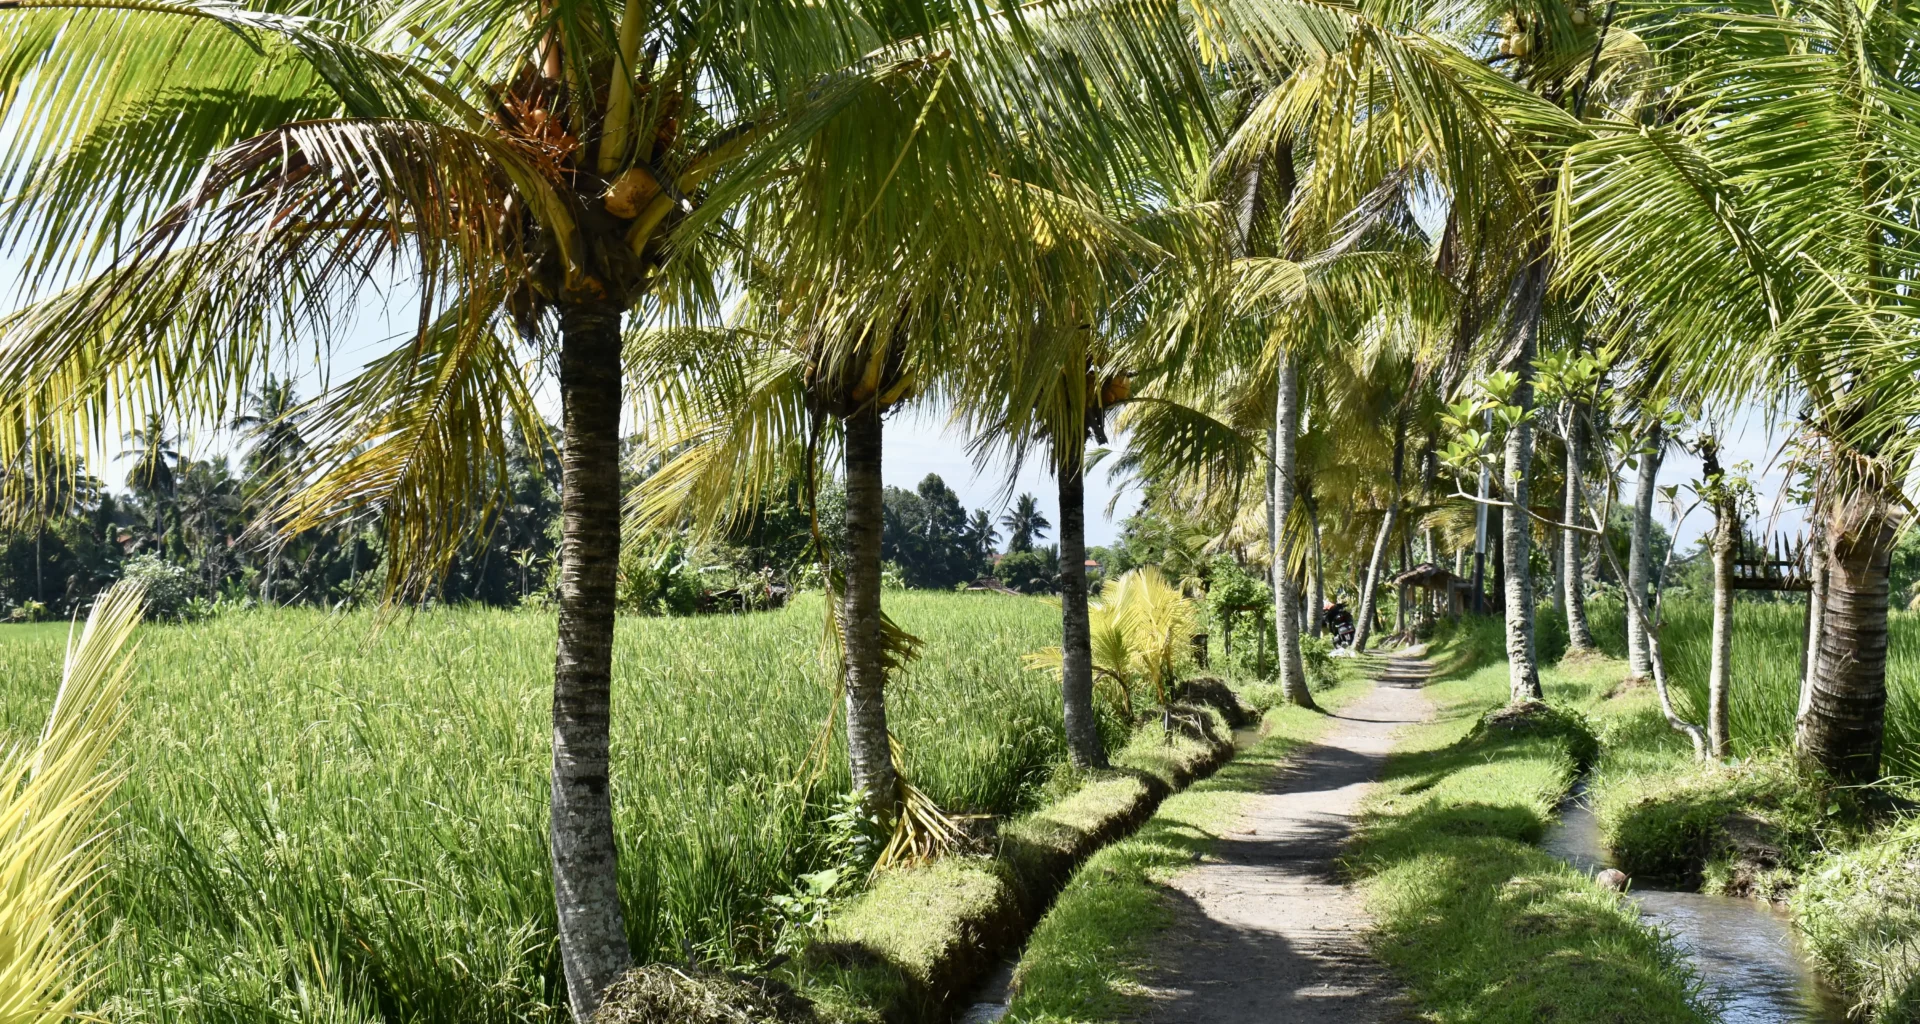 Best Hiking trails with rice terraces in Ubud, Bali